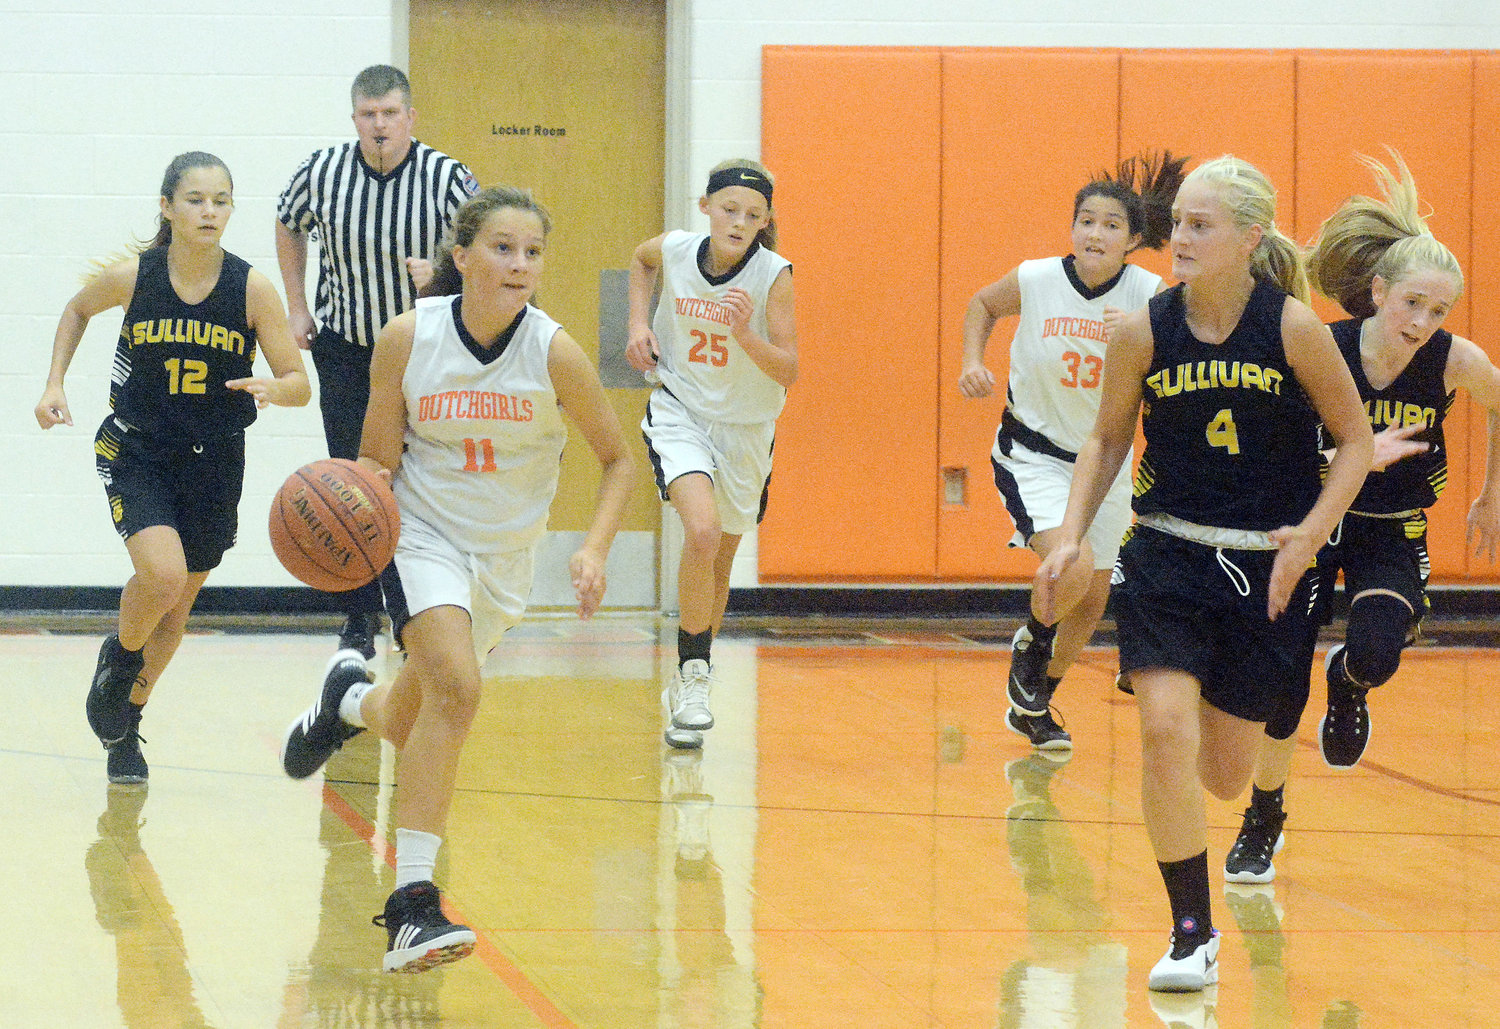 Cameron Ryerson (above, second from left) drives down the court for Owensville’s seventh-grade Dutchgirl basketball team last Tuesday night in their season opener against Sullivan’s Lady Eagles at Owensville Elementary School. Other seventh-grade girls basketball players running down the court (above, from left) include Sullivan’s Ella Kirk, Owensville’s Cameron Slinkard, Owensville’s Lainey Moss, Sullivan’s Kaydence Bollinger and Sullivan’s Lily Schmuke. Owensville’s seventh and eighth-grade basketball teams are in tournament action this week at Hermann and Washington respectively.